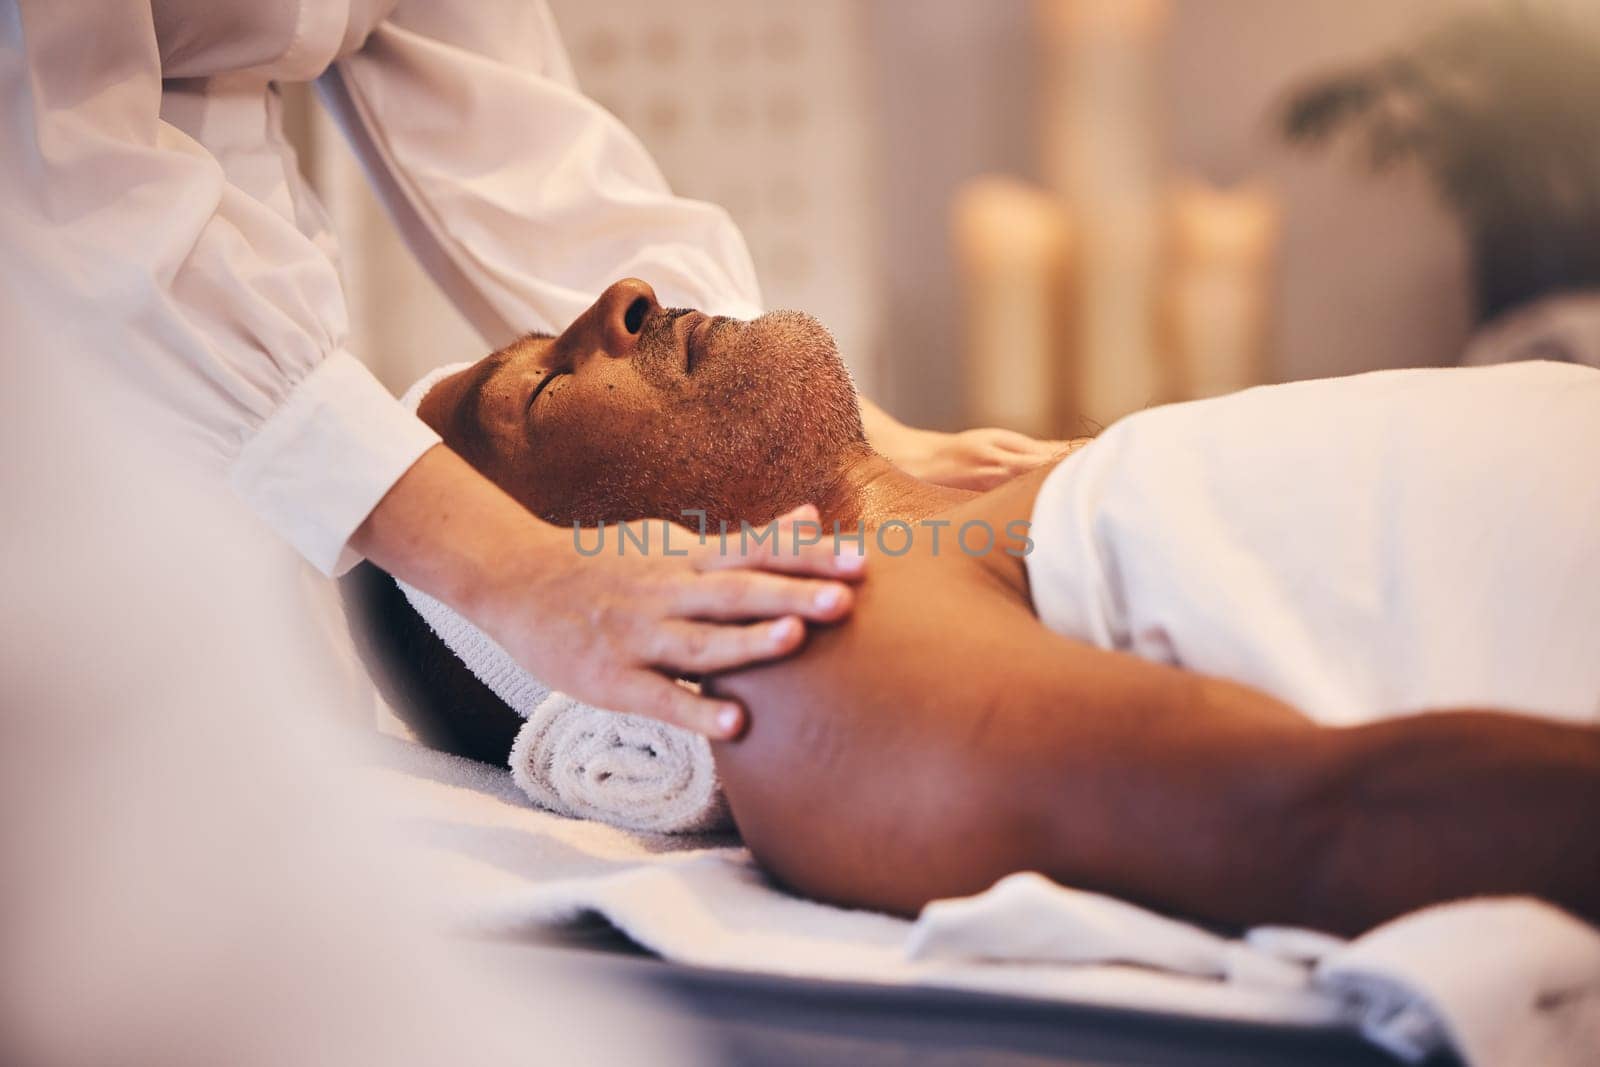 Spa, physiotherapy or hands massage old man to relax the body, mind or shoulders on a physical therapy table. Luxury, peace and zen masseuse helping a senior or elderly client with stress relief.